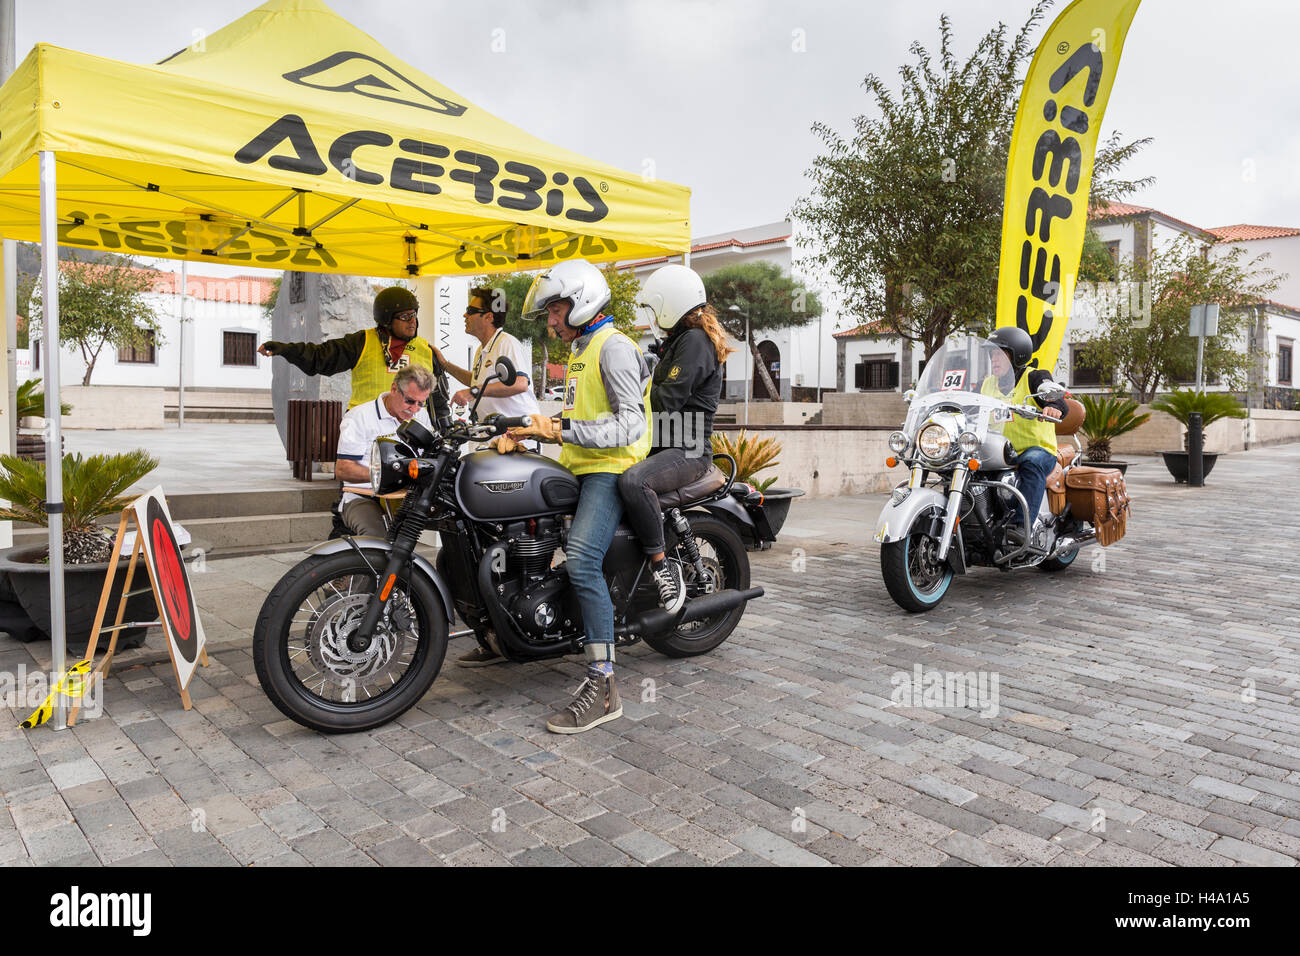 Classic and modern motorcycles during the first days route from Santiago del Teide through Masca and return.  Queens Cavalcade event, during which 91 motorcycles will spend 4 days completing various routes throughout the Canary Islands. Stock Photo